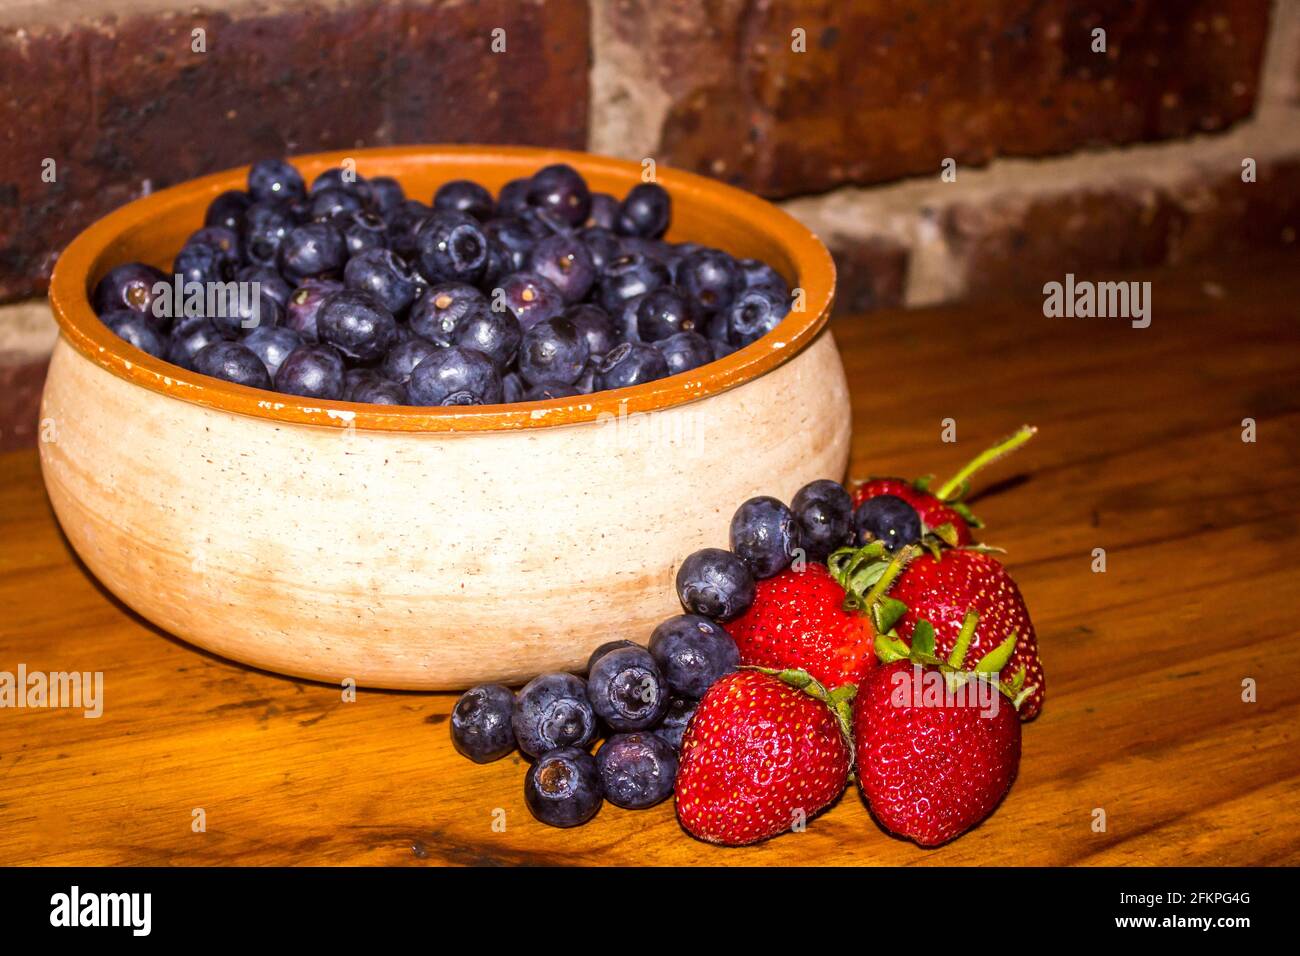 A rustic pottery bowl, filled with Indigo colored blueberries, and extra blueberries and some strawberries next to it Stock Photo